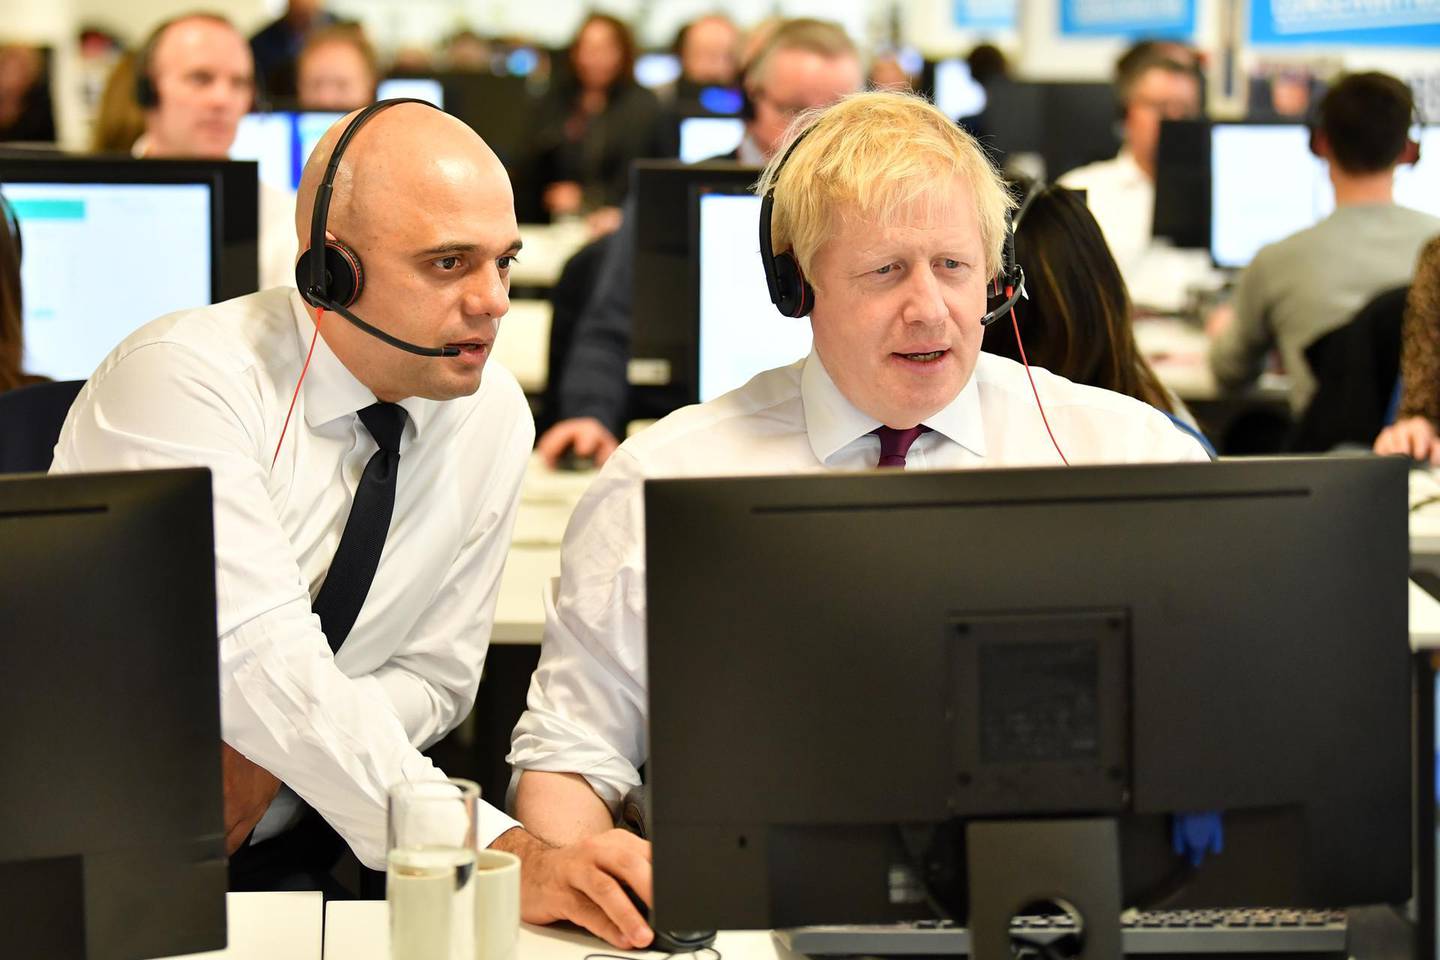 ***Getty European BestPix*** LONDON, UNITED KINGDOM - DECEMBER 8: Britain's Chancellor of the Exchequer Sajid Javid (L) and Britain's Prime Minister Boris Johnson (R) man the phones at the Conservative Campaign Headquarters Call Centre on December 8, 2019 in central London. Britain will go to the polls on December 12, 2019 to vote in a pre-Christmas general election. (Photo by Ben Stansall - WPA Pool/Getty Images)